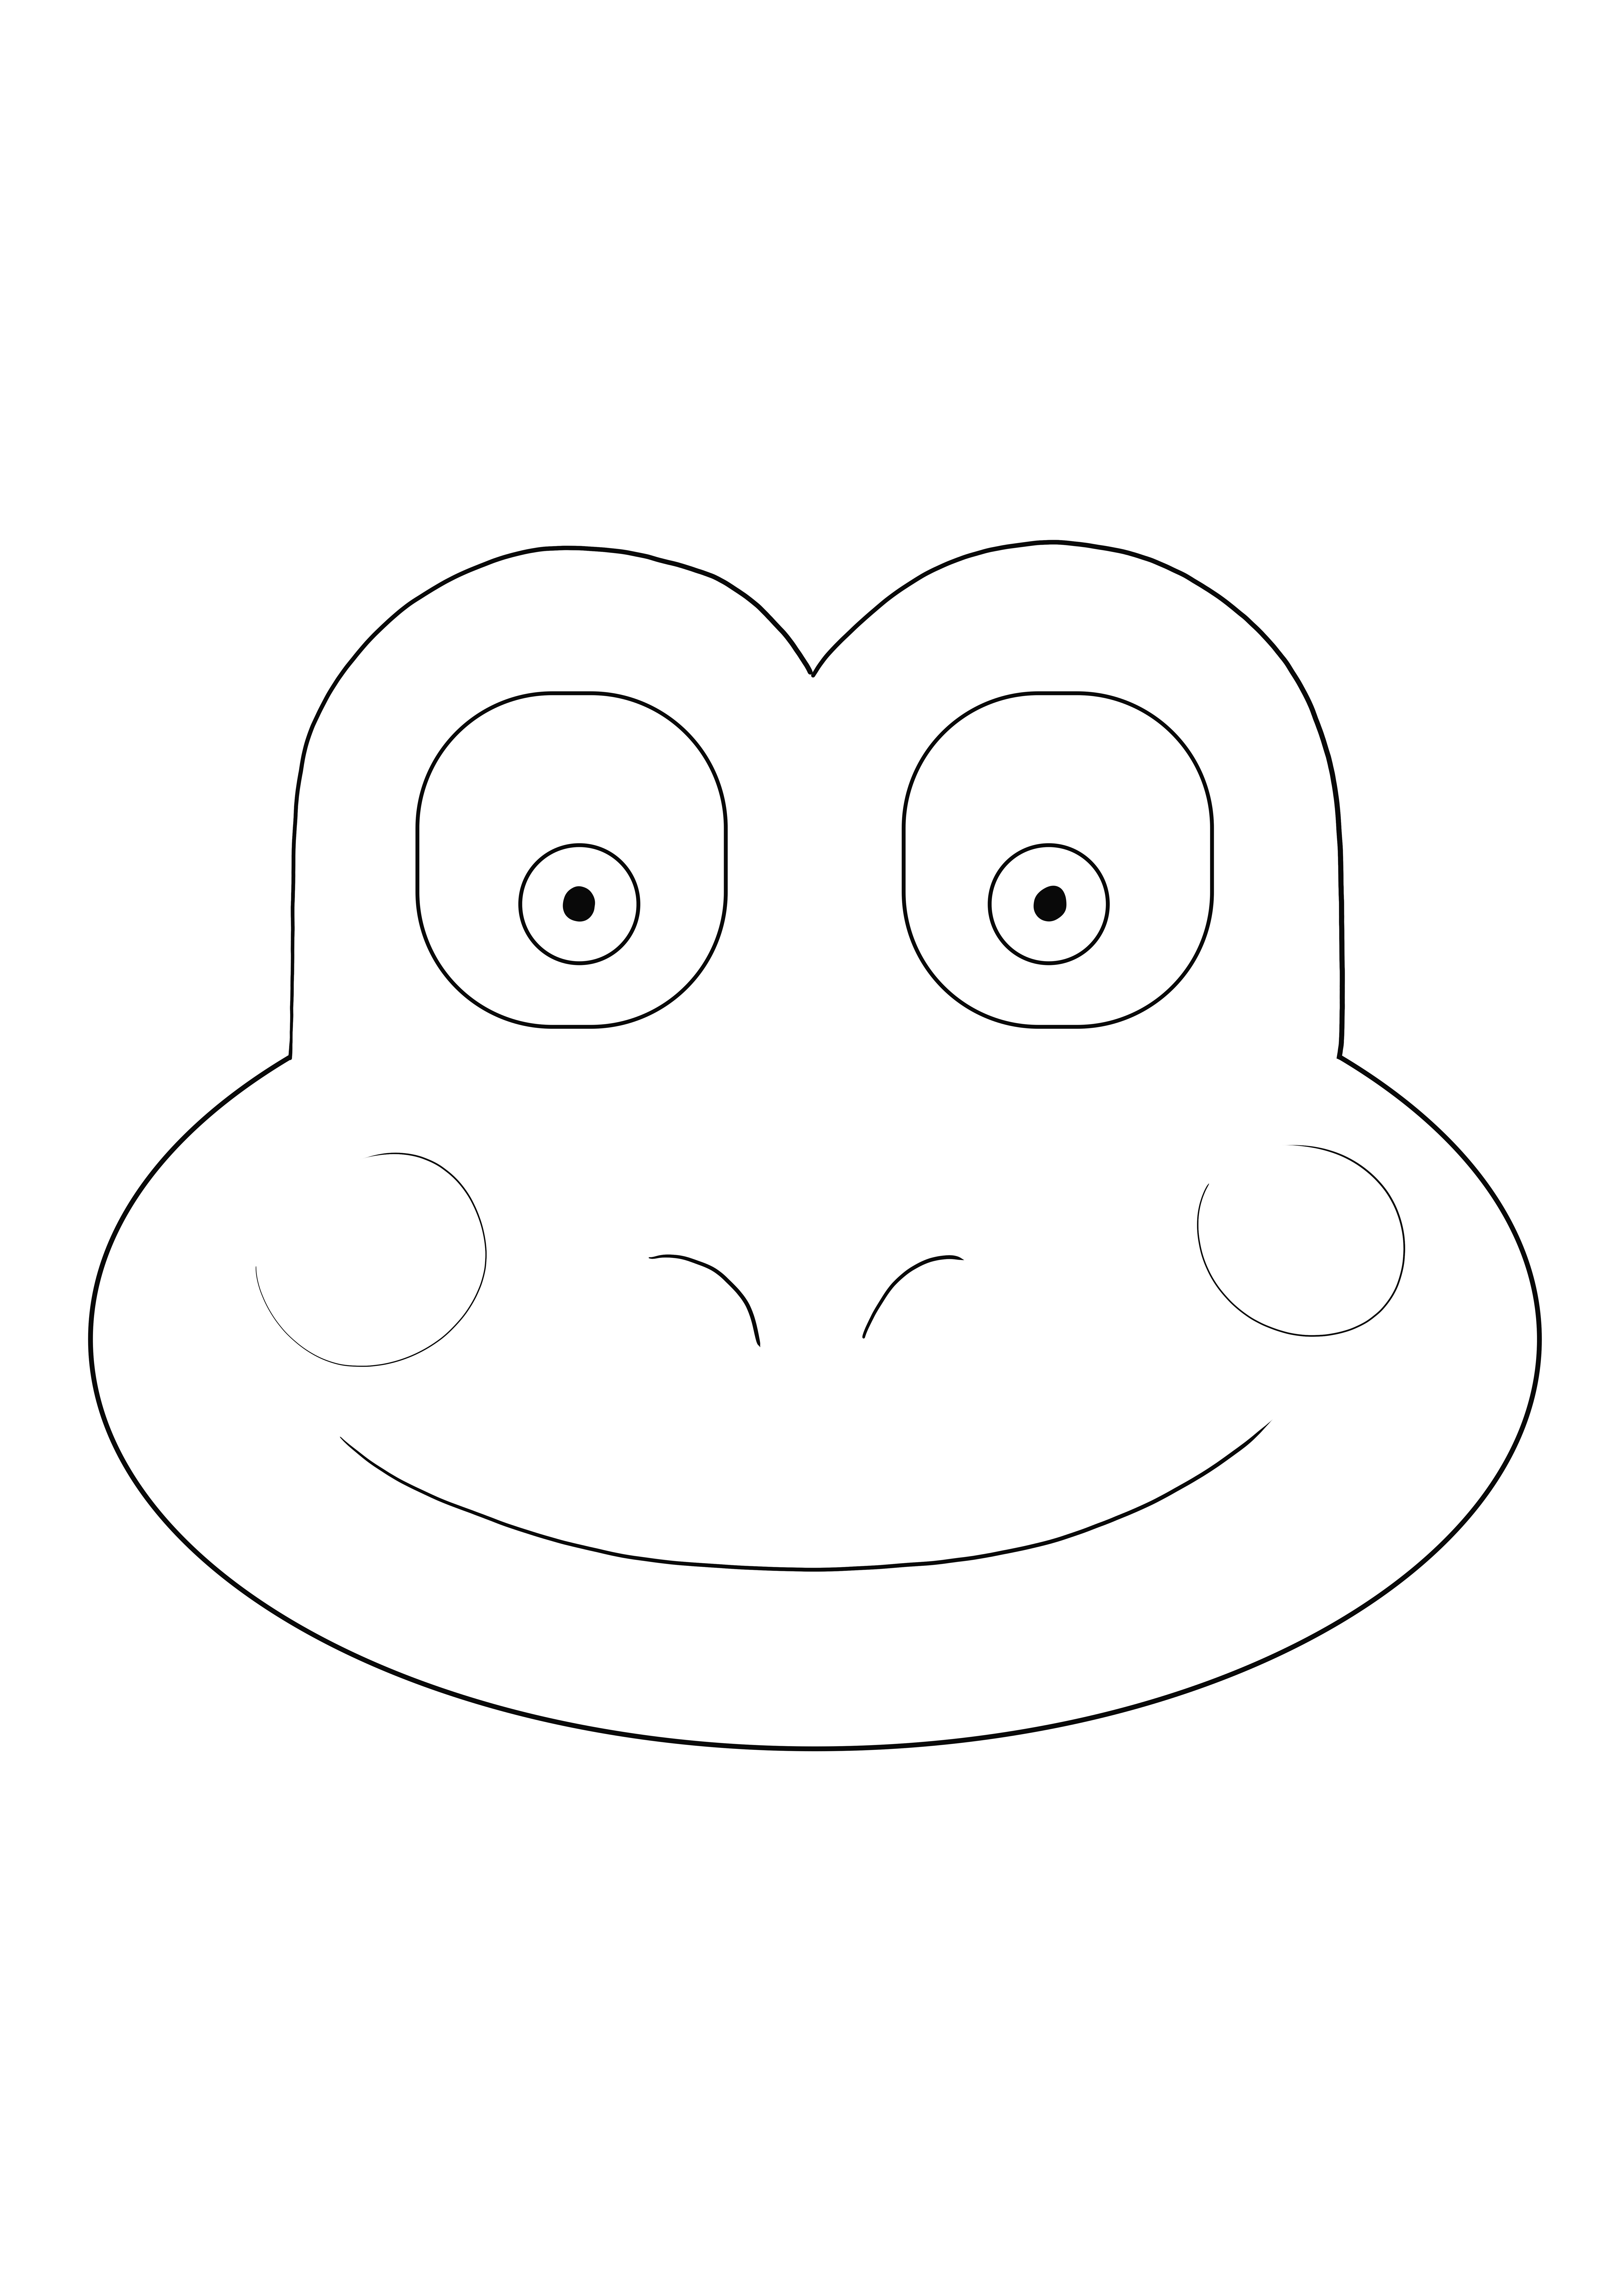 Frog Face coloring sheet-free to print and download for kids of all ages